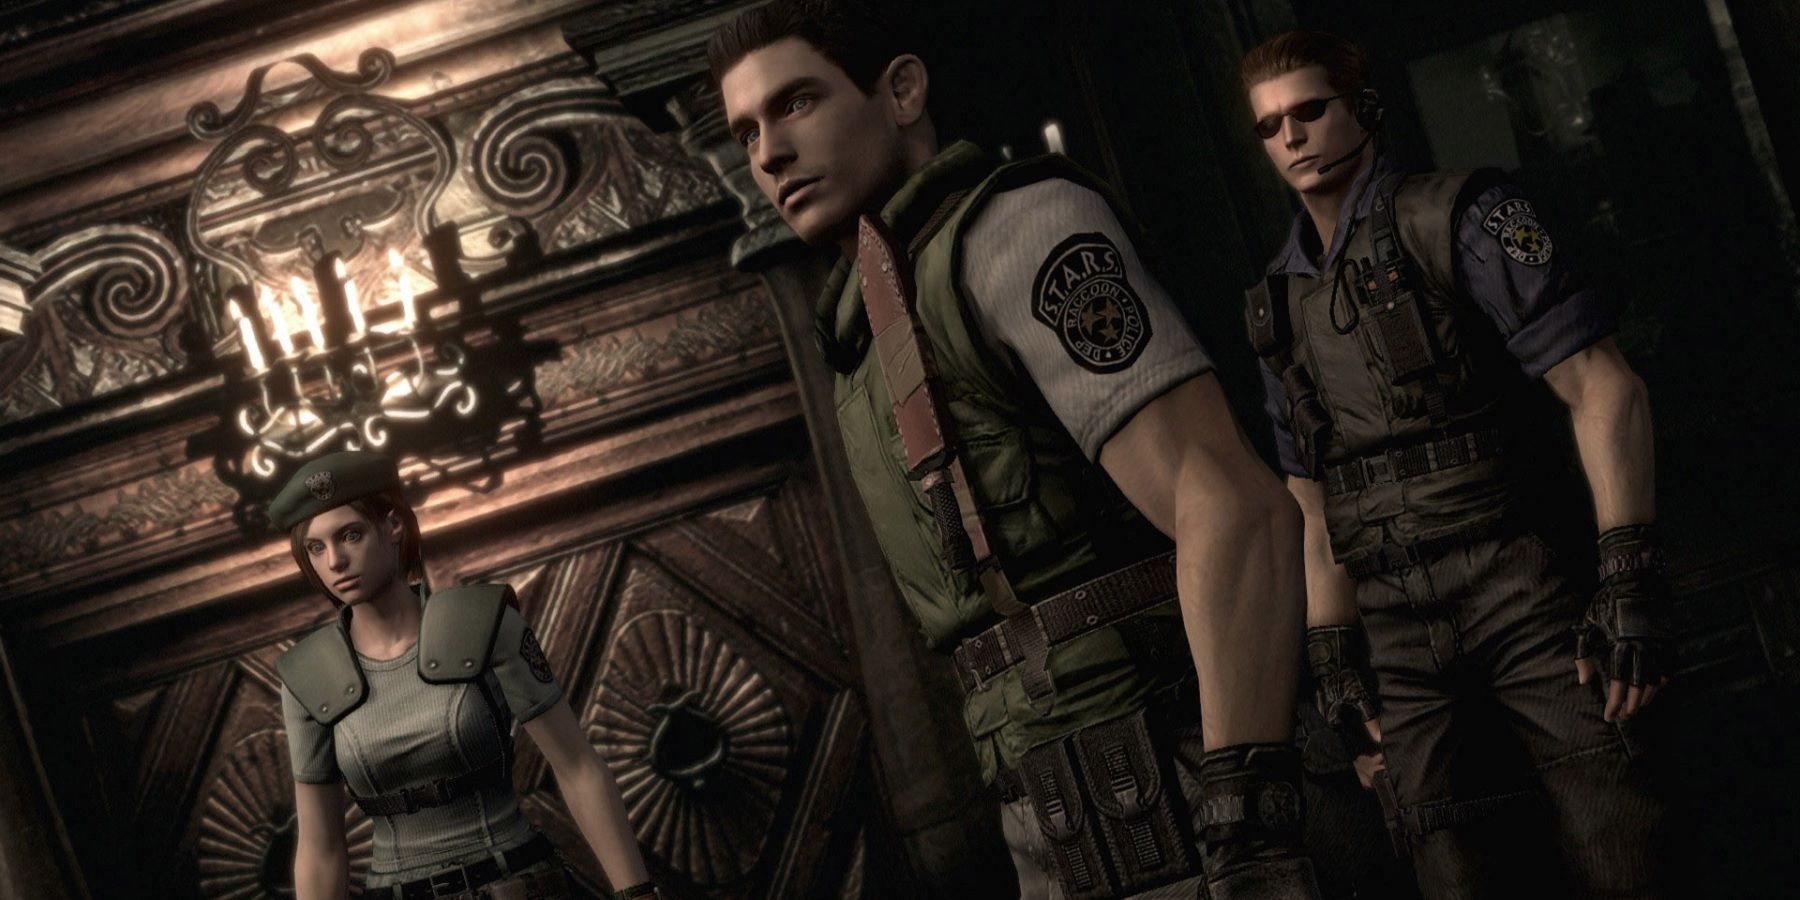 Buy Resident Evil 4 Remake from the Humble Store